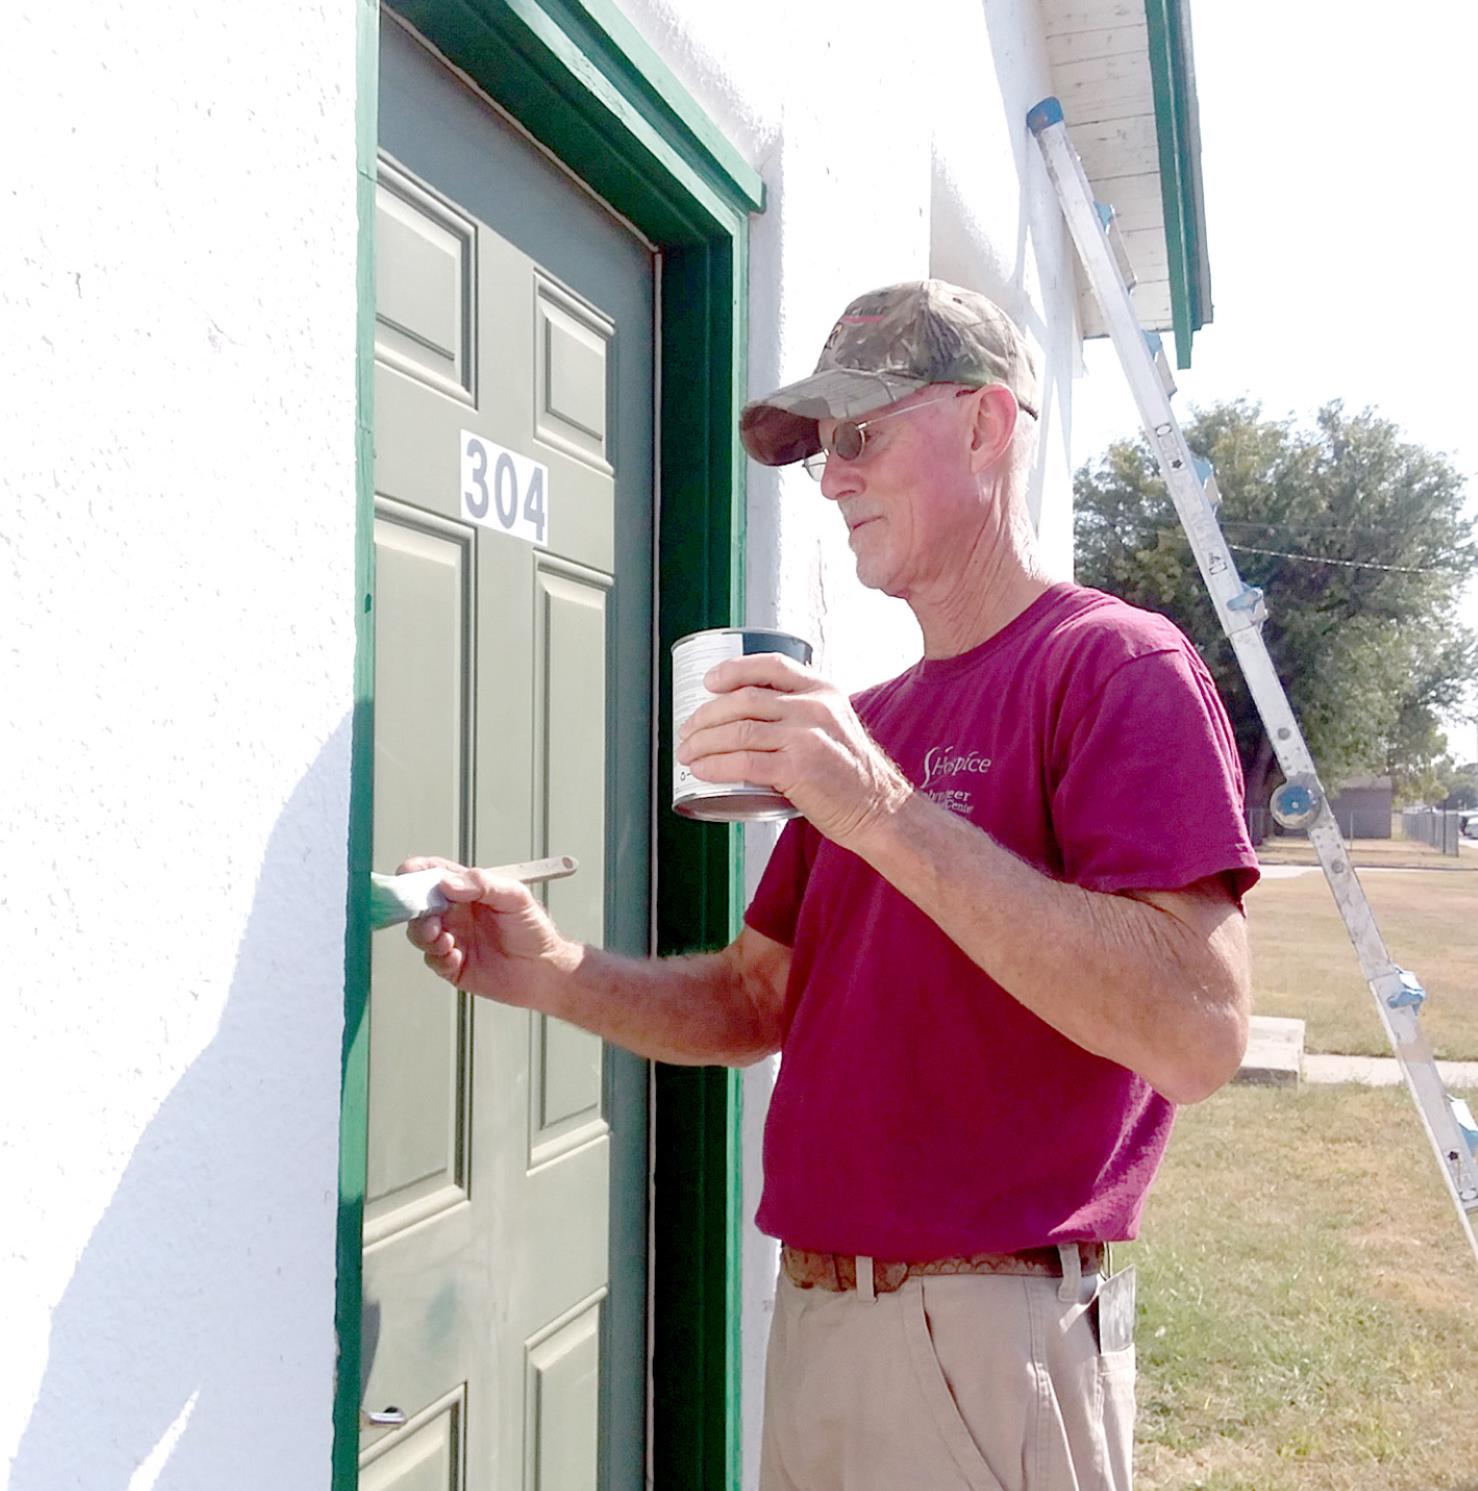 STOCKTON FOOD PANTRY DIRECTOR LARRY GOSSELIN paints the trim on the front door of the building. New windows have been installed, courtesy of donations from the public, and the paint and materials were donated by the City of Stockton.